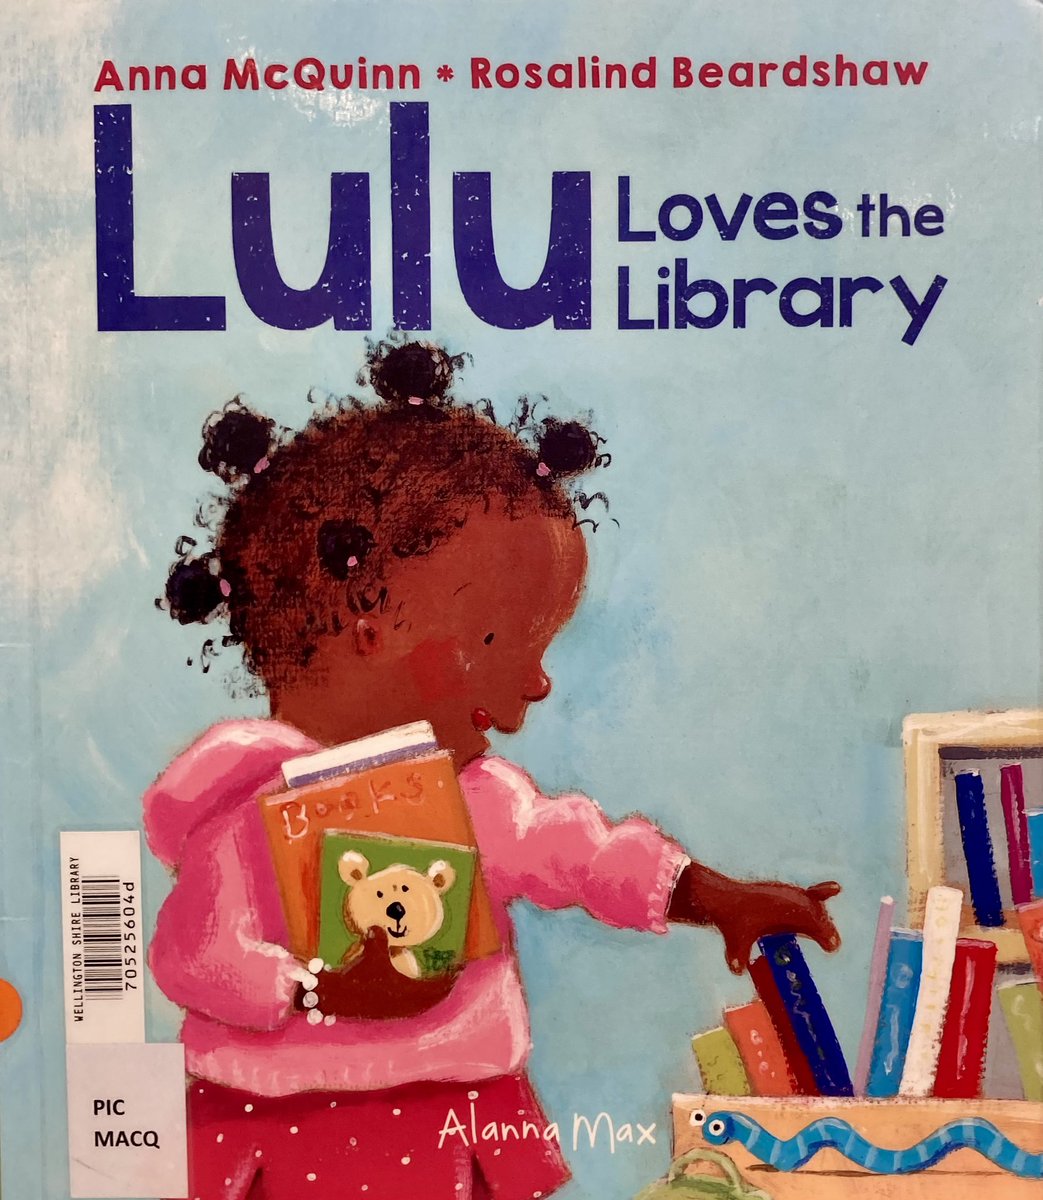 Happy Library Lovers Day to all fans of #publiclibraries #librarieschangelives